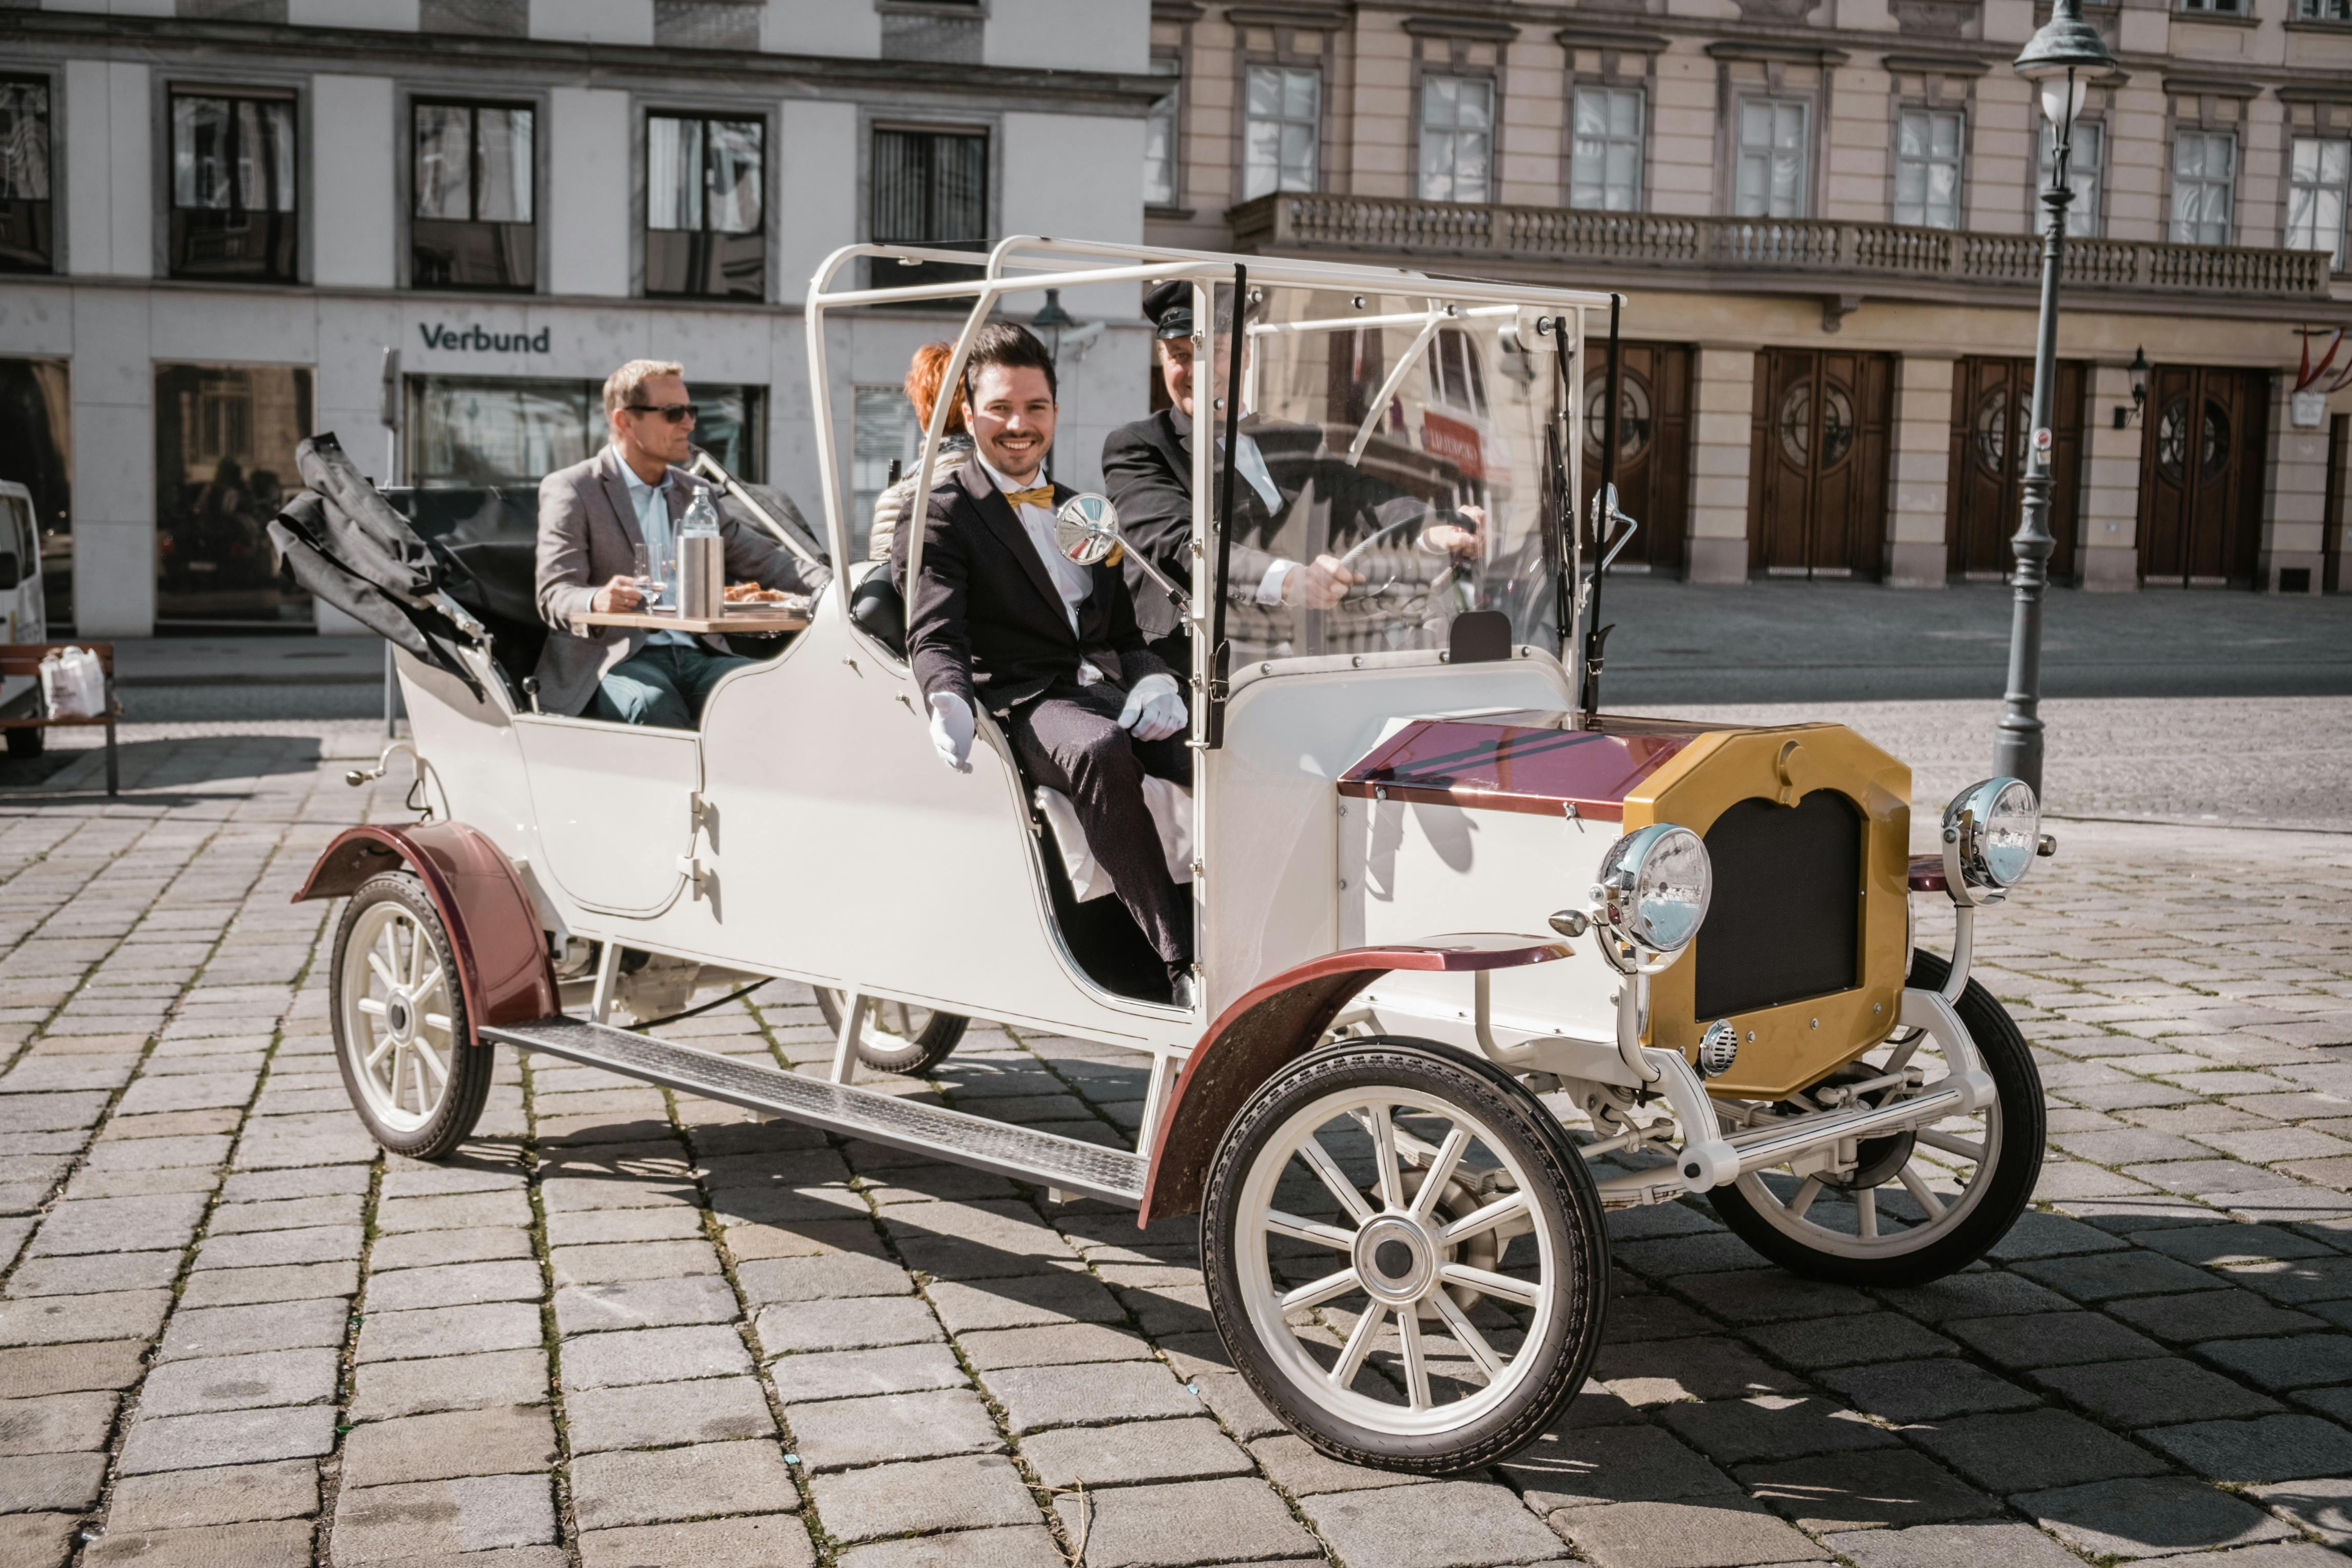 Vienna Sparkling Sightseeing in a Classic Electric Car: A Unique Way to Explore the City